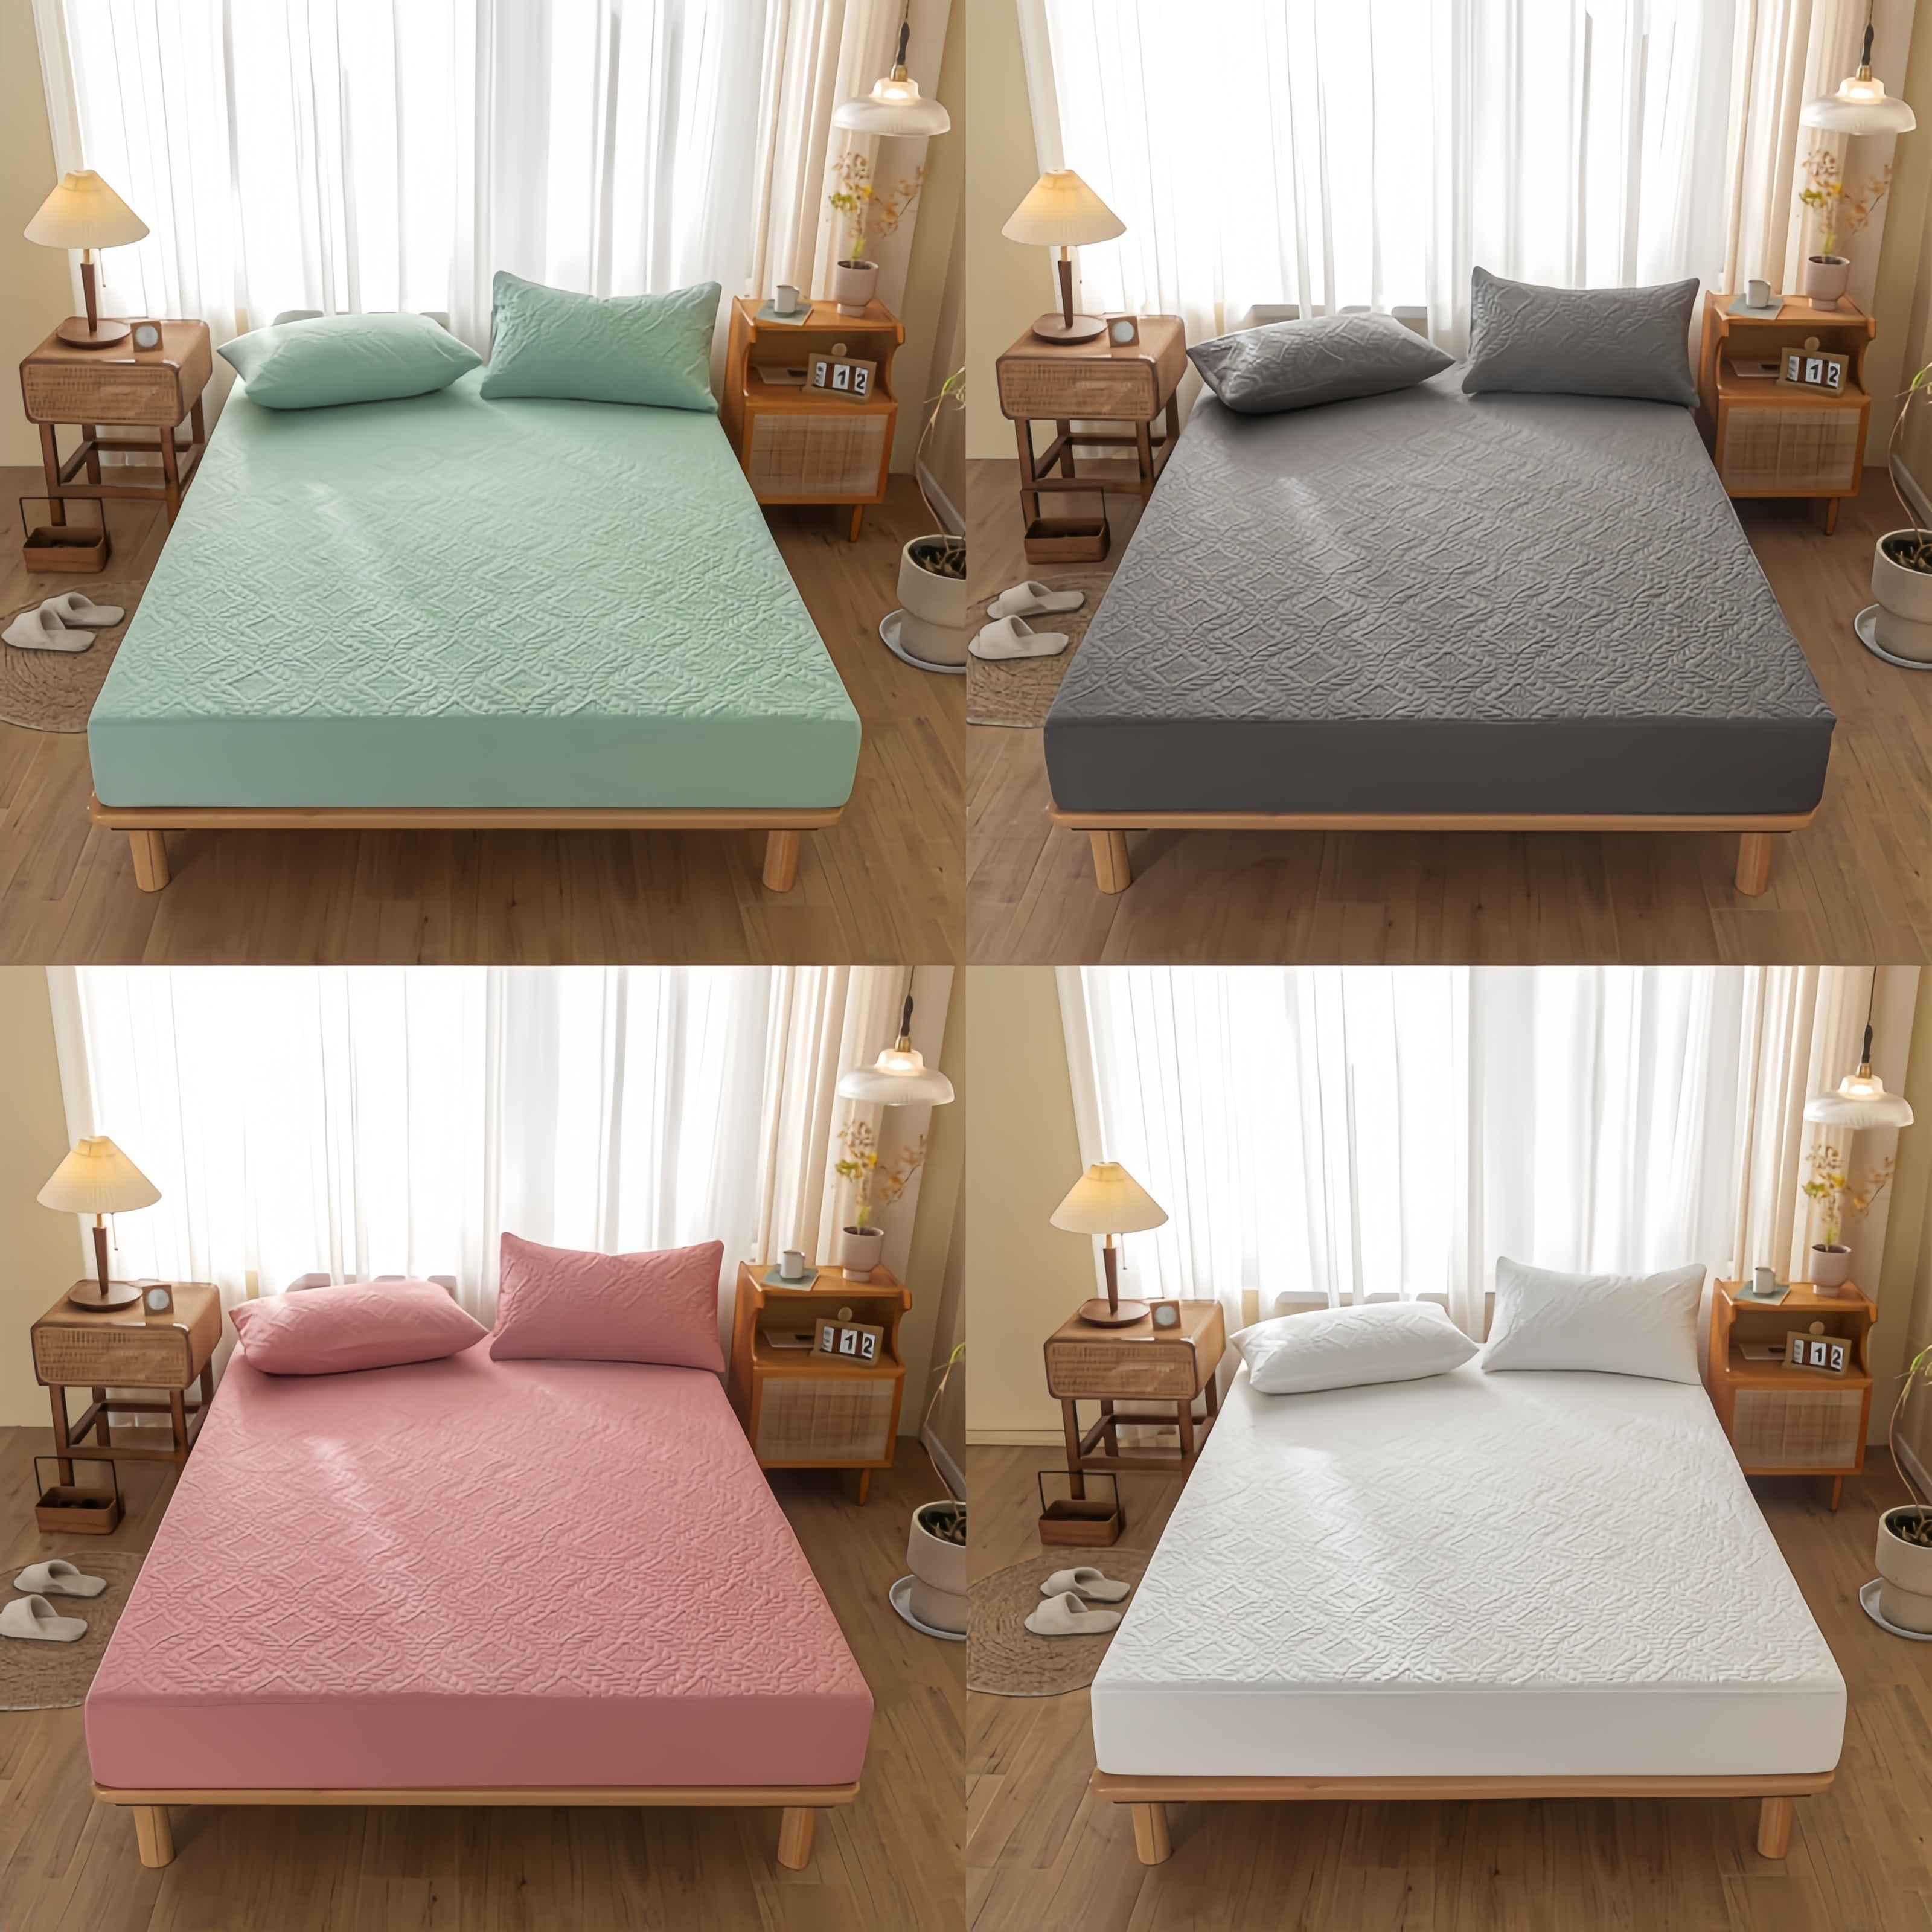 

3pcs Solid Color Fitted Sheet Set (fitted Sheet 1pcs + Pillowcase 2pcs, Without Core), Waterproof Embowel Design With Cotton Clip 360° Package Height 12inch/30cm Fitted Sheet Pillowcase